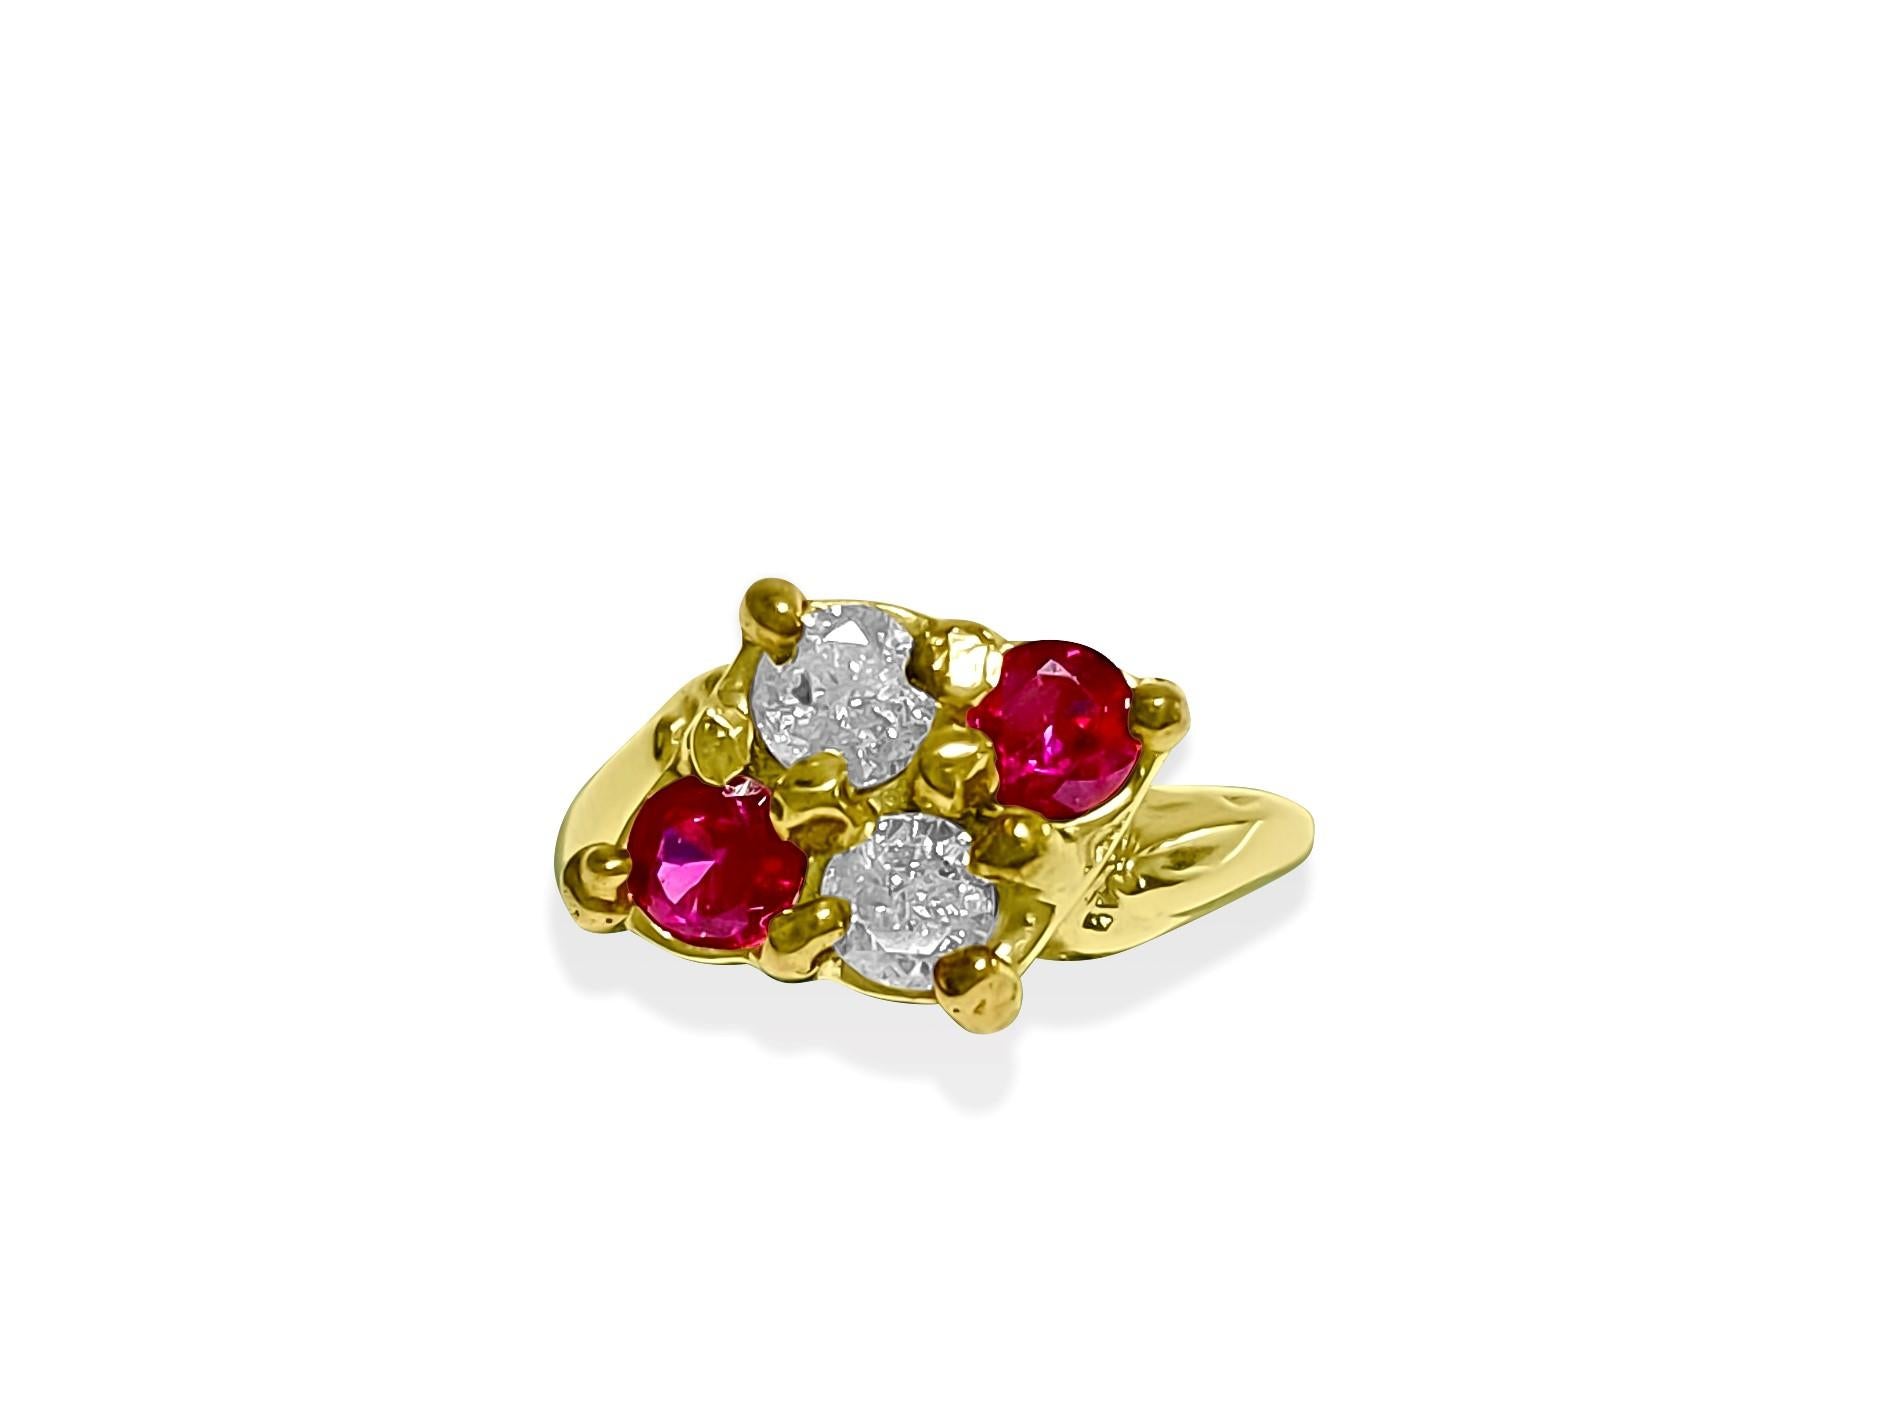 Round Cut Vintage 0.40 Carat Ruby Diamond Cocktail Ring in 14 Karat Yellow Gold For Sale